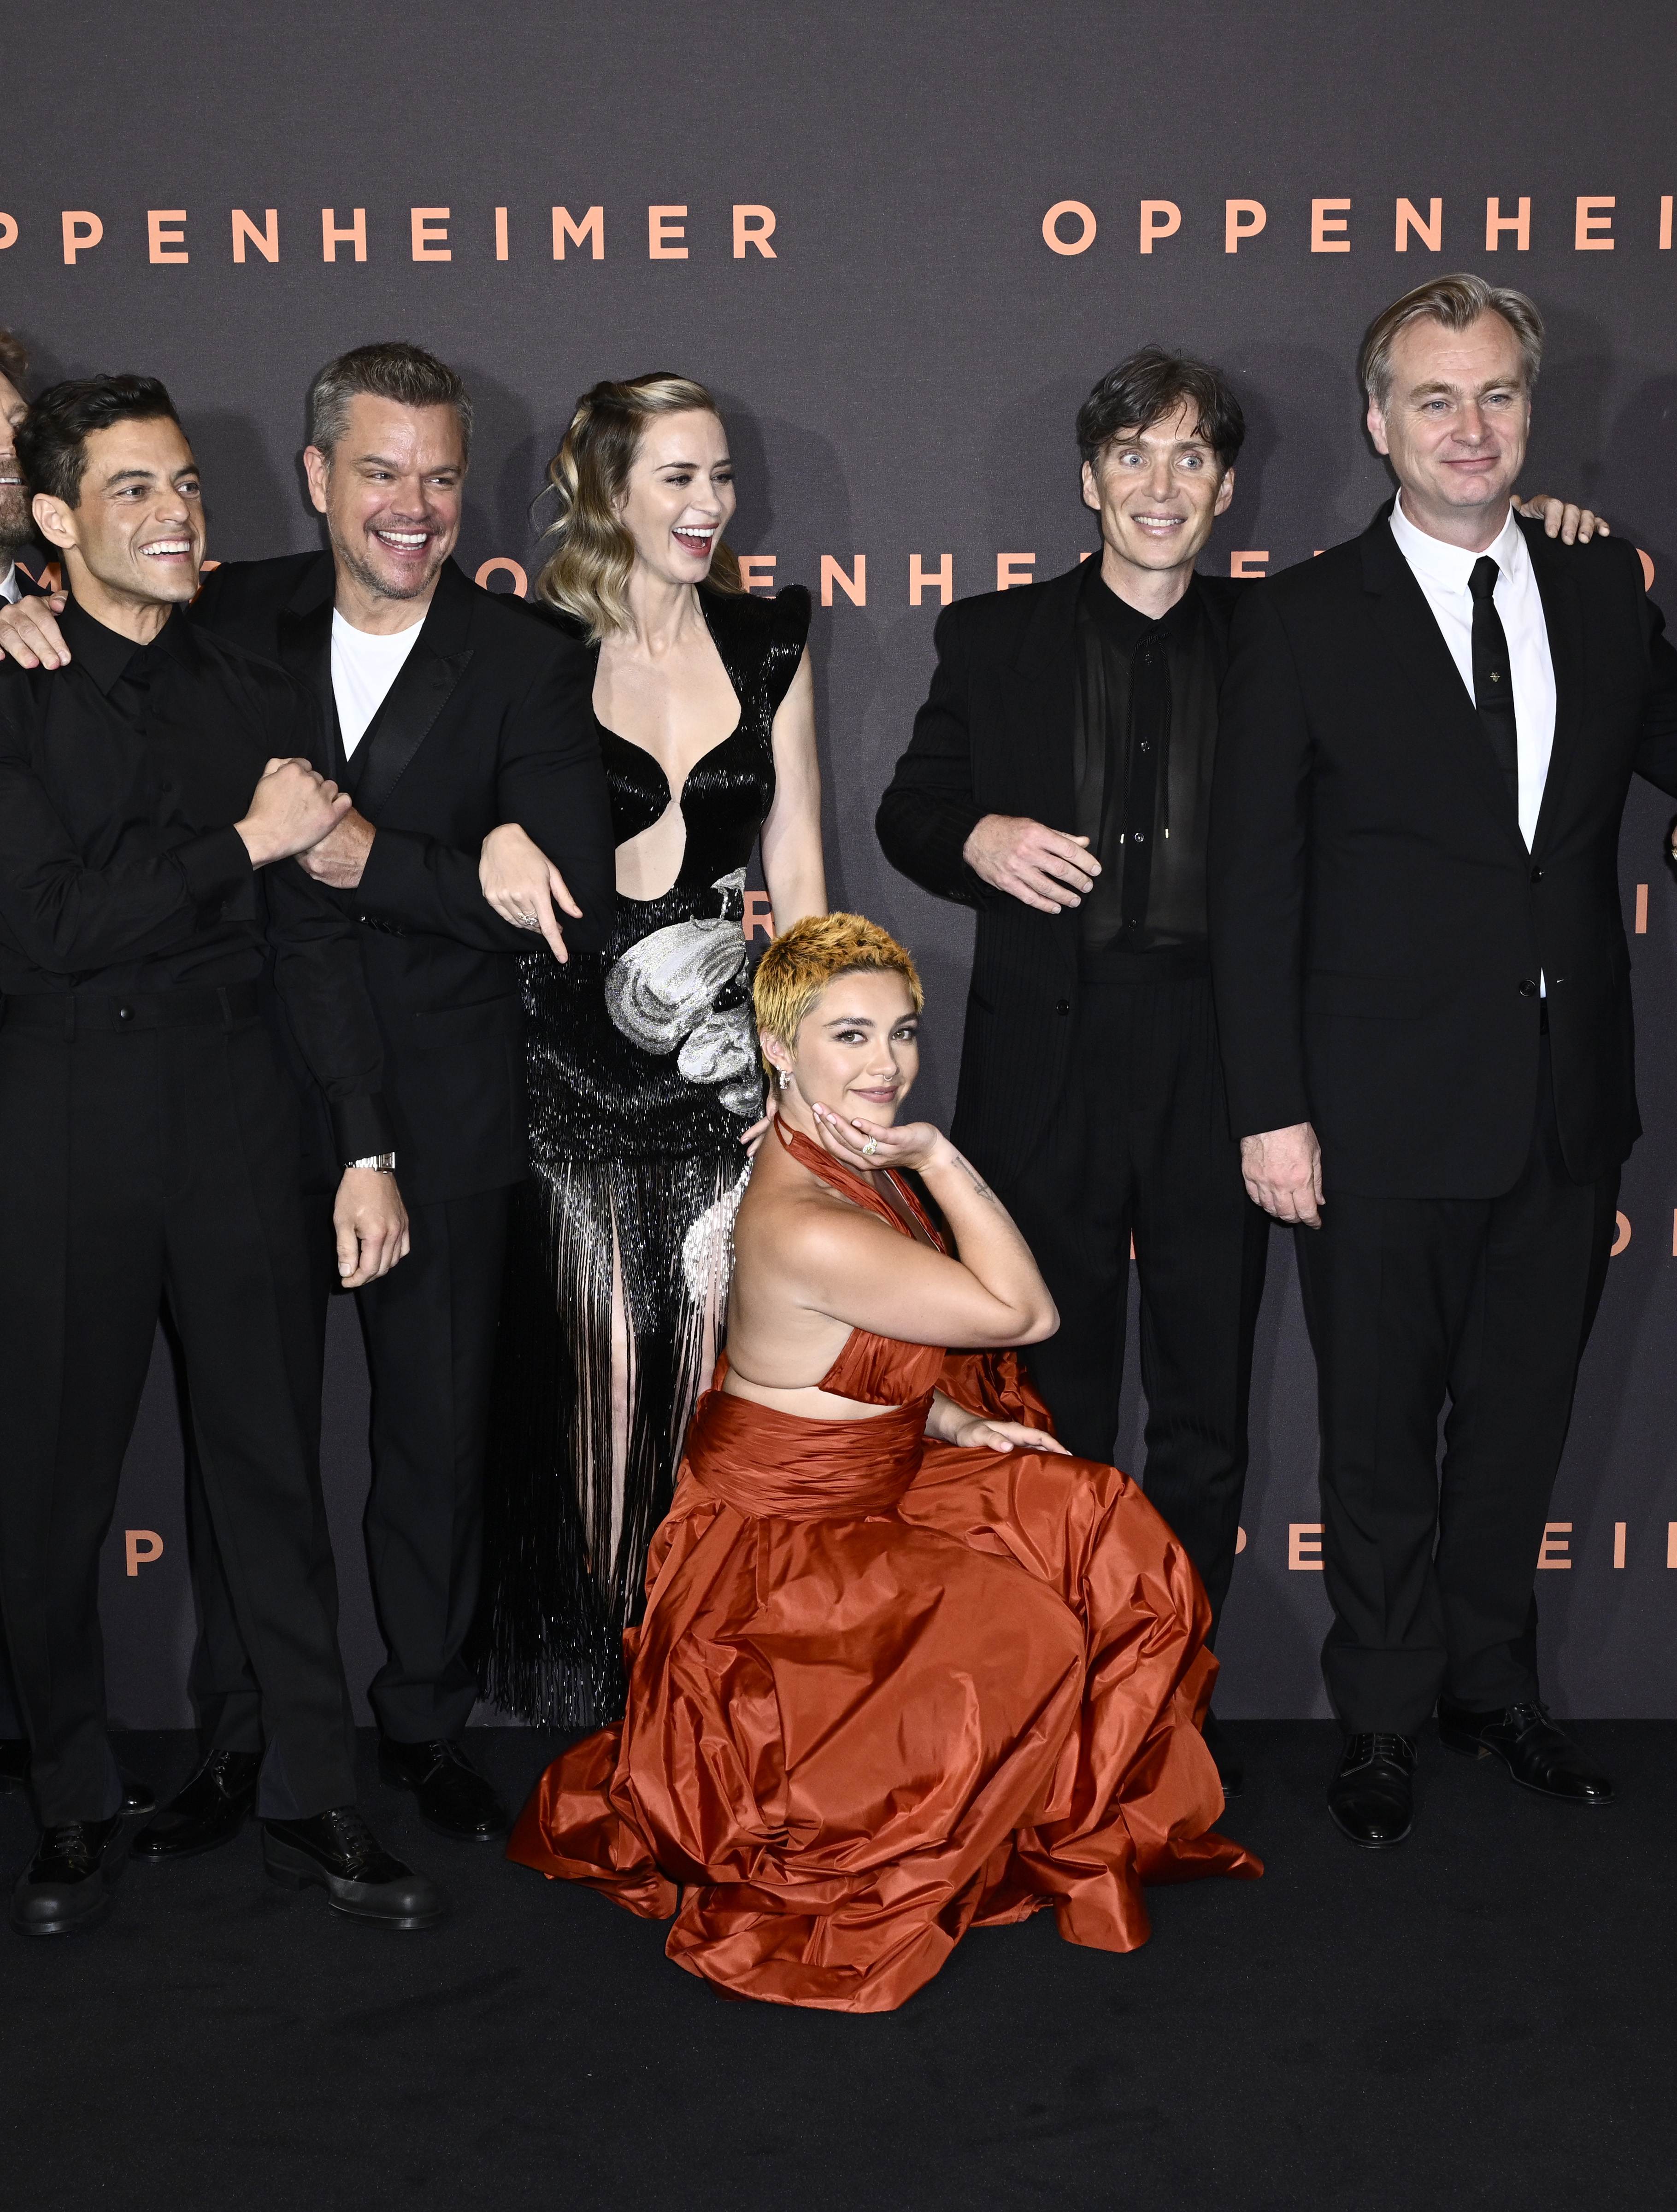 Christopher Nolan and the cast of Oppenheimer, including Matt, at the premiere